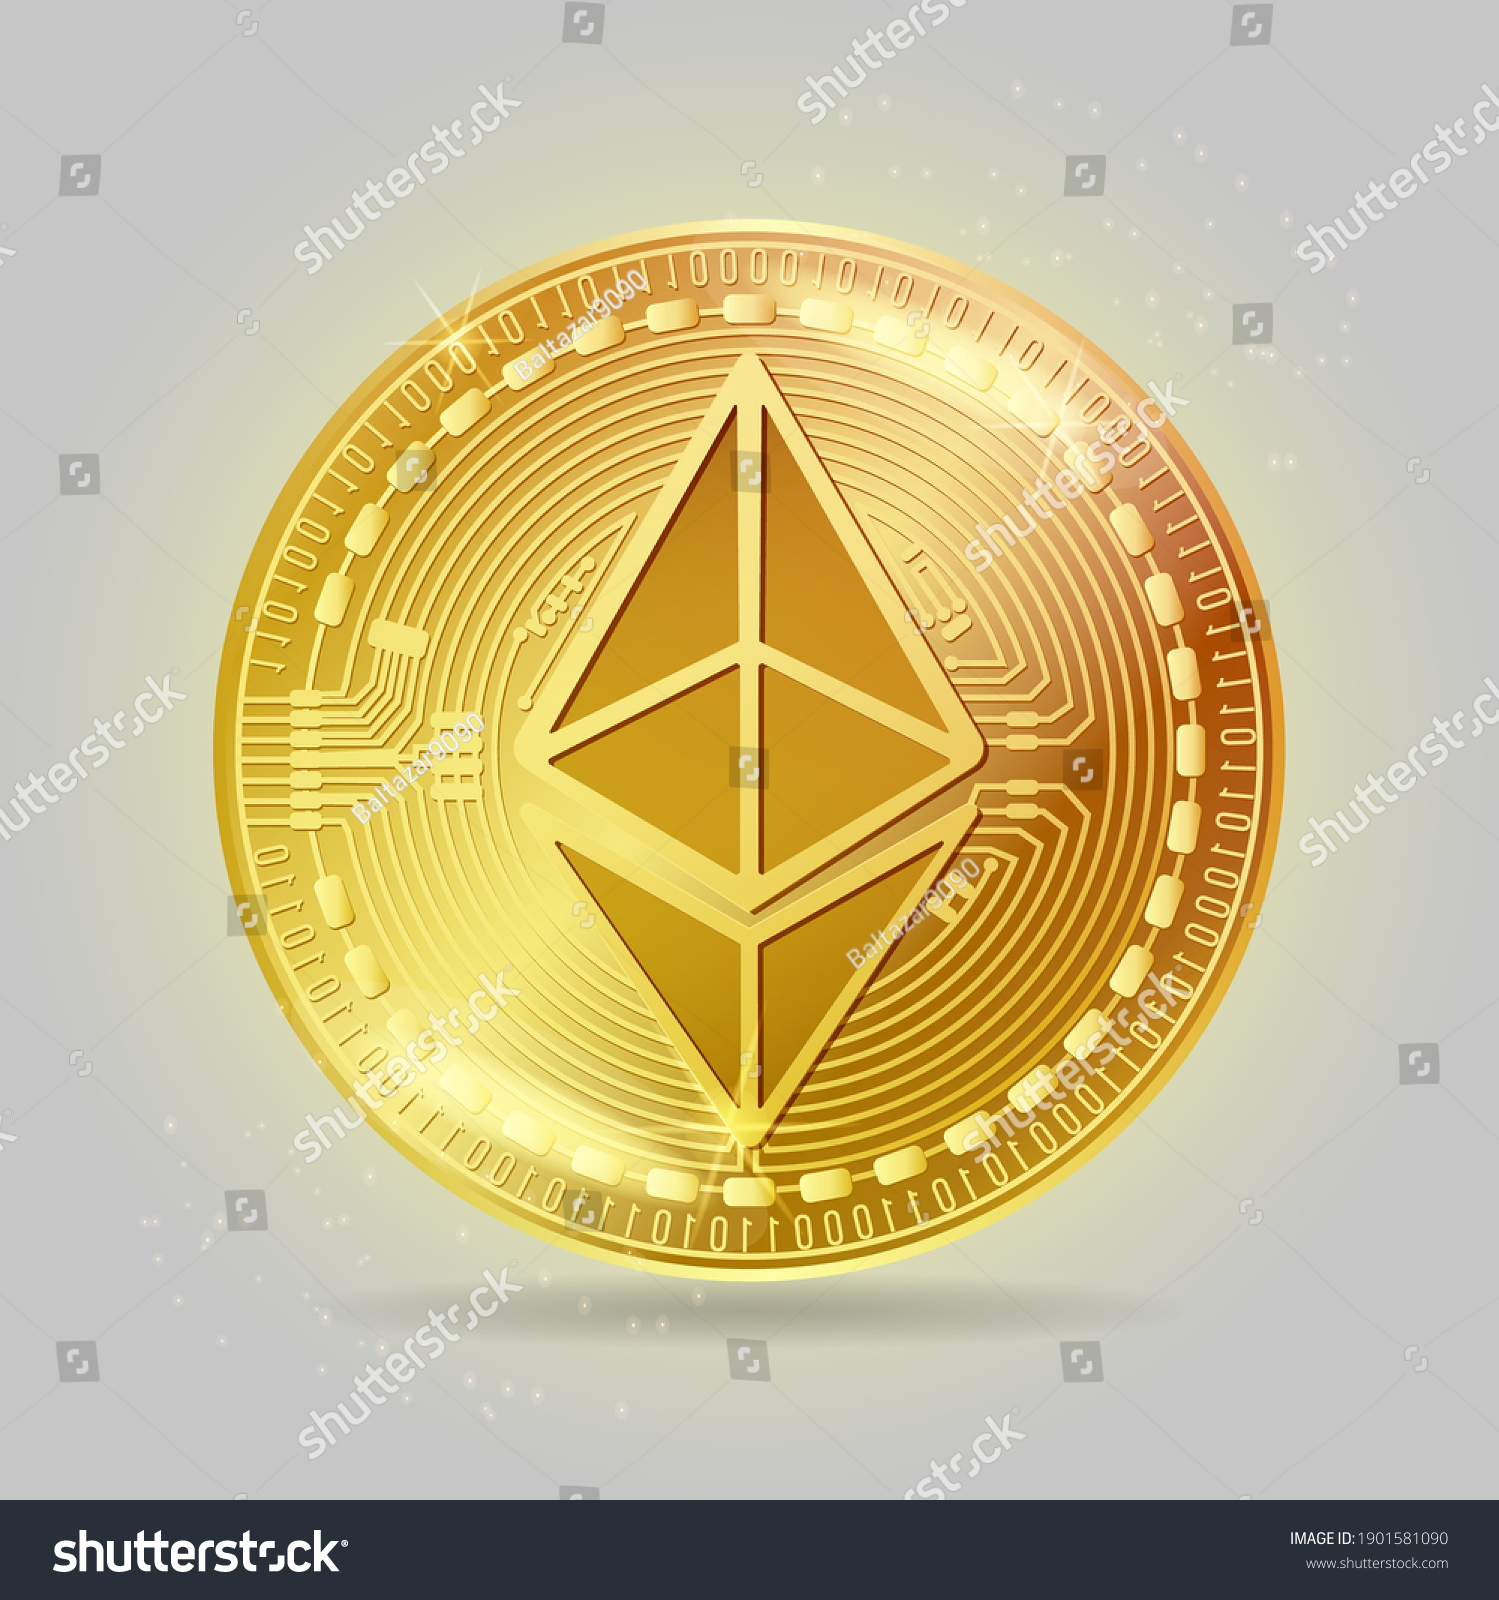 What is ethereum gold coin ethereum news 1 17 18